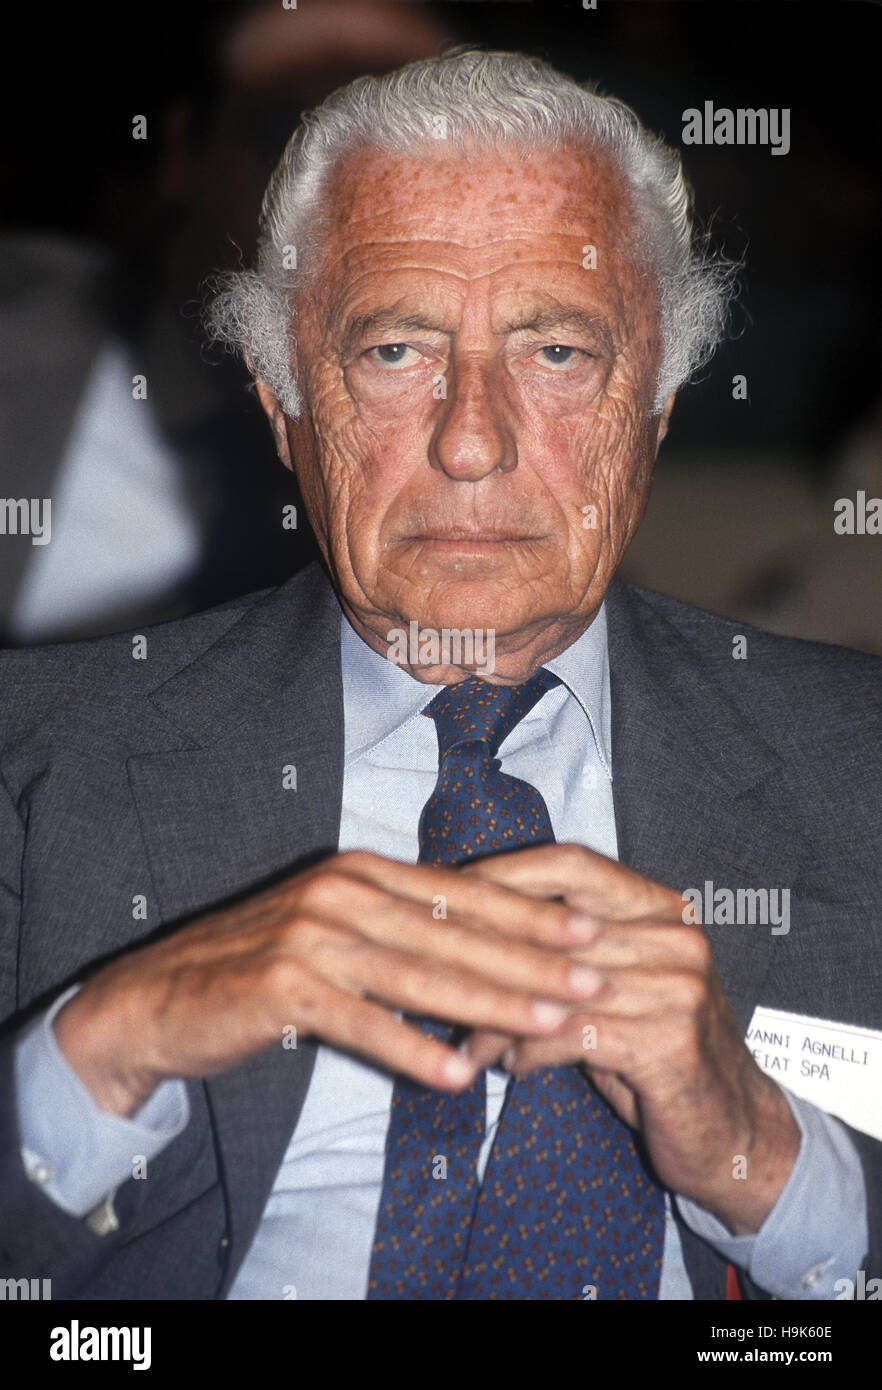 Giovanni Agnelli, said 'Gianni' and also known as the Lawyer (Turin, 12 March 1921 - Turin, Jan. 24, 2003), was an Italian entrepreneur and politician, principal shareholder and director of the FIAT at the summit, as well as a senator for life. Stock Photo